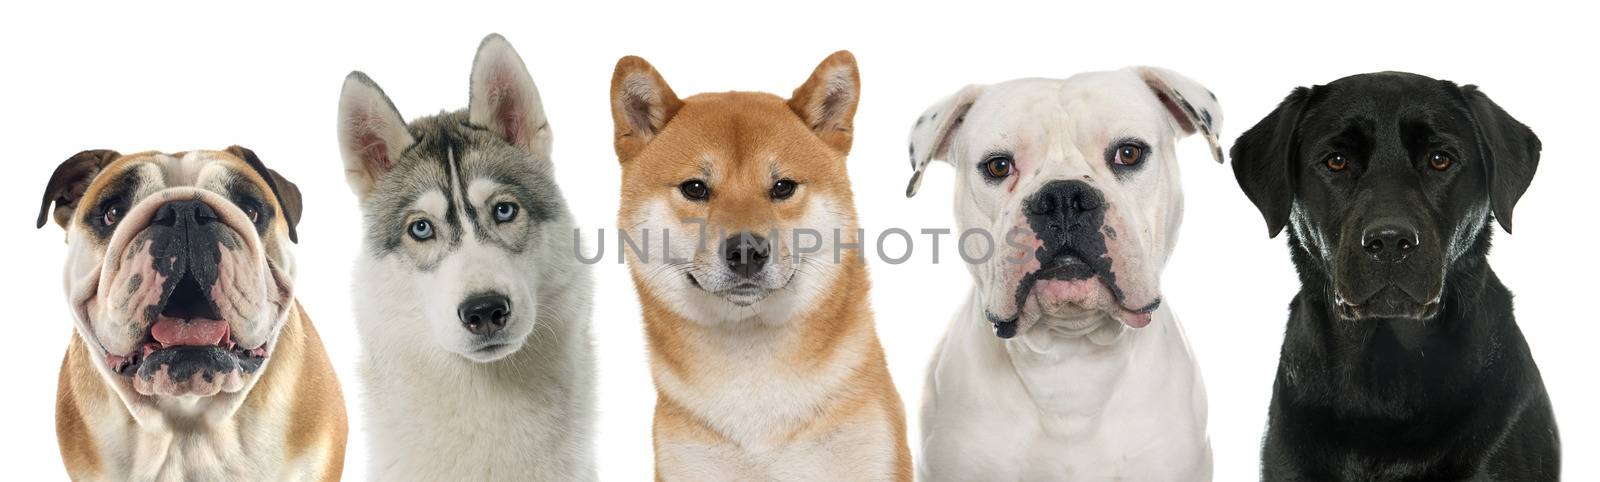 five purebred dogs in front of white background